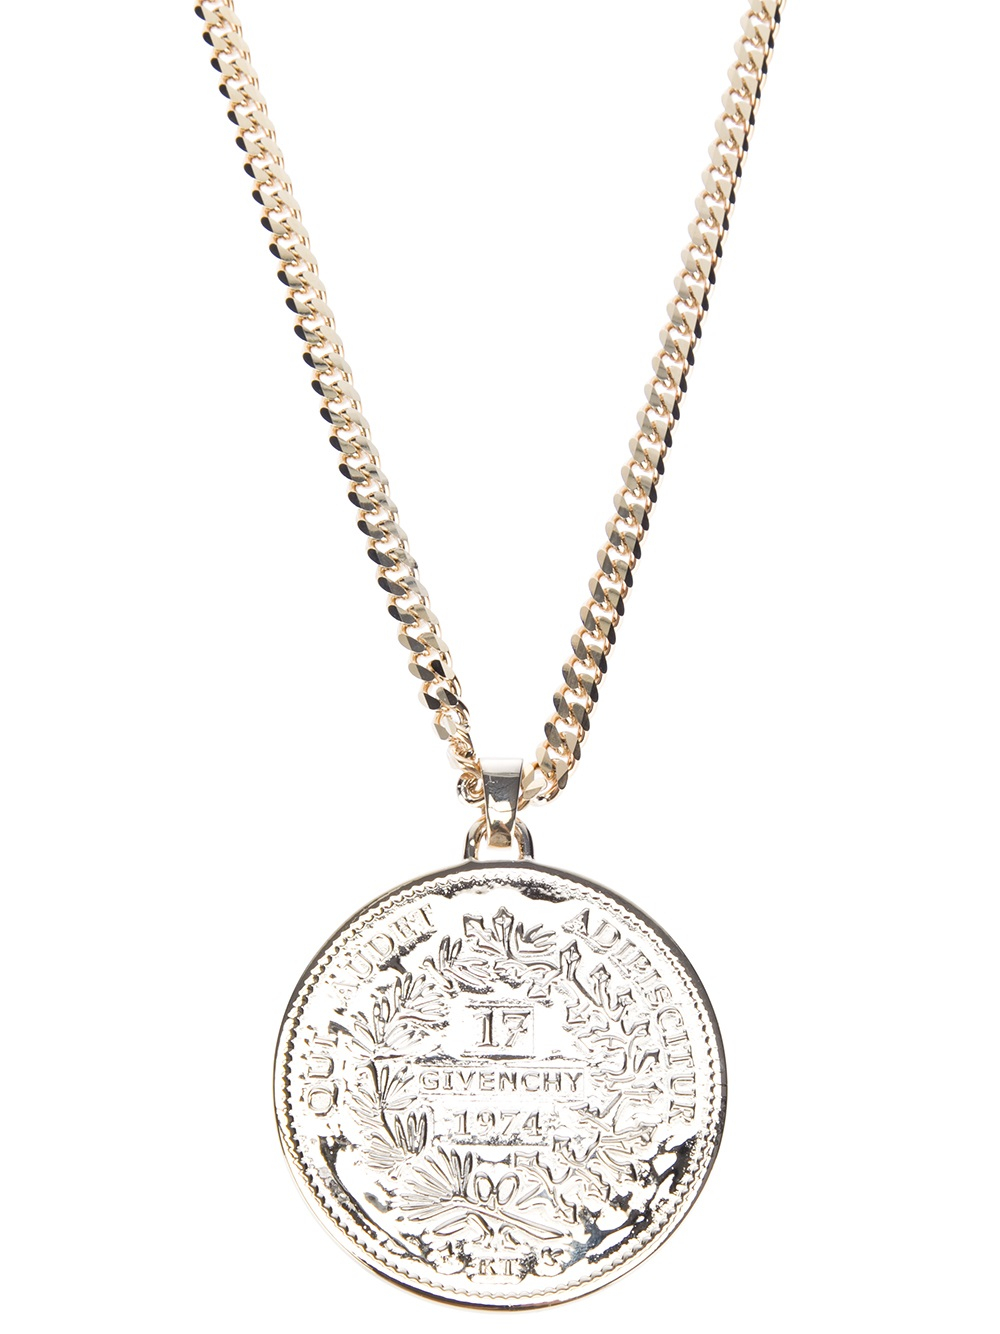 Givenchy Pendant Necklace in Metallic 